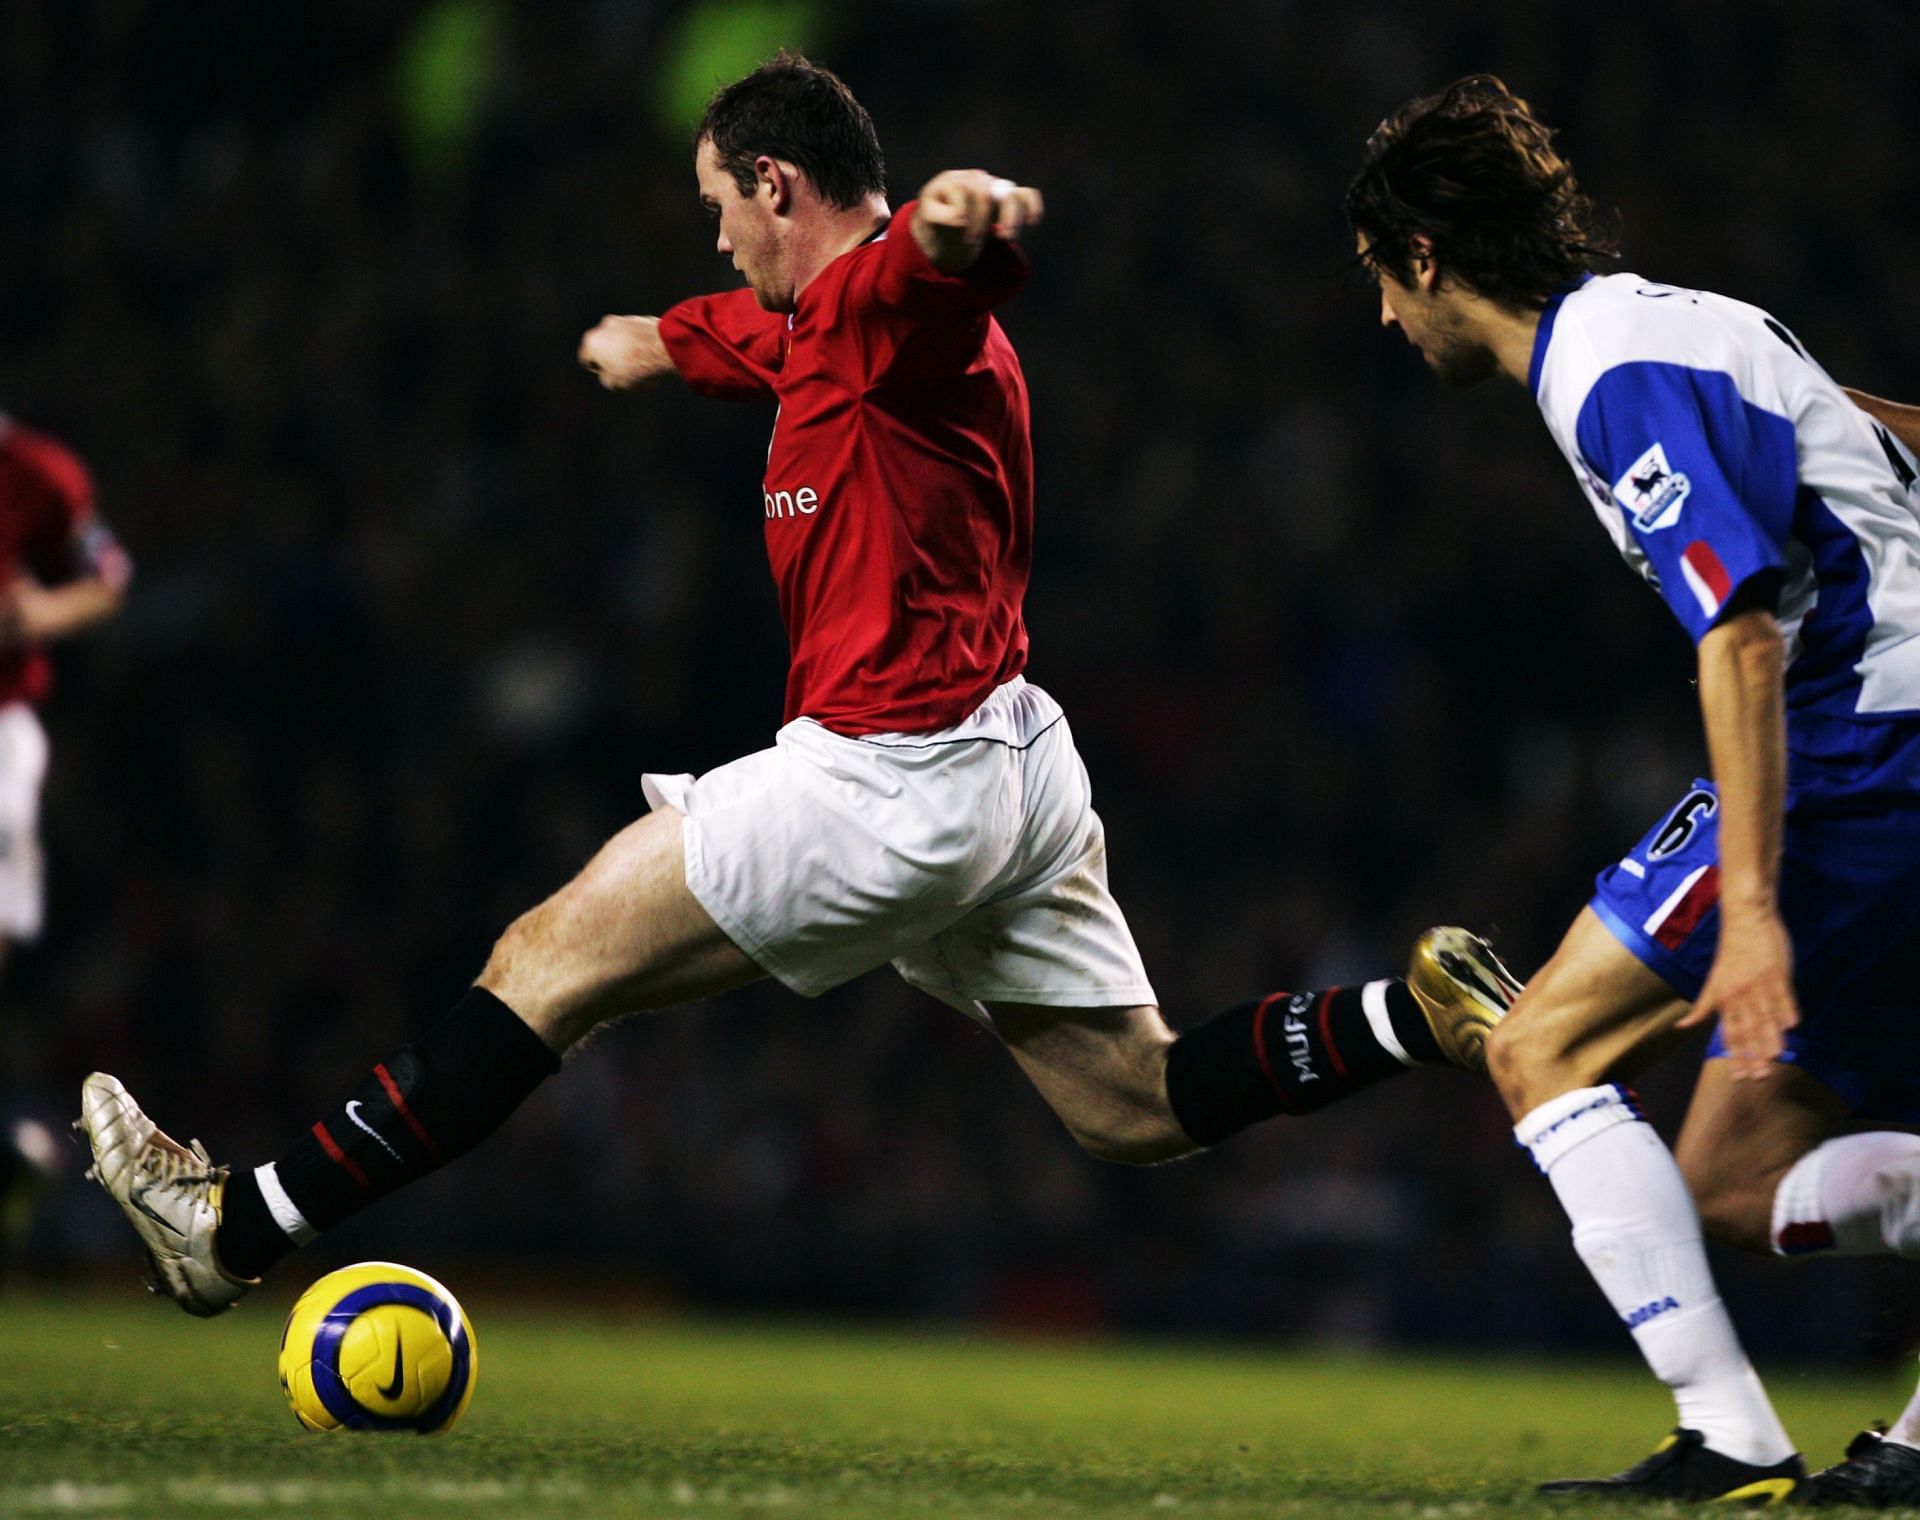 Wayne Rooney in action in his first year at Manchester United (Manchestwer United vs Crystal Palace December 18, 2004)